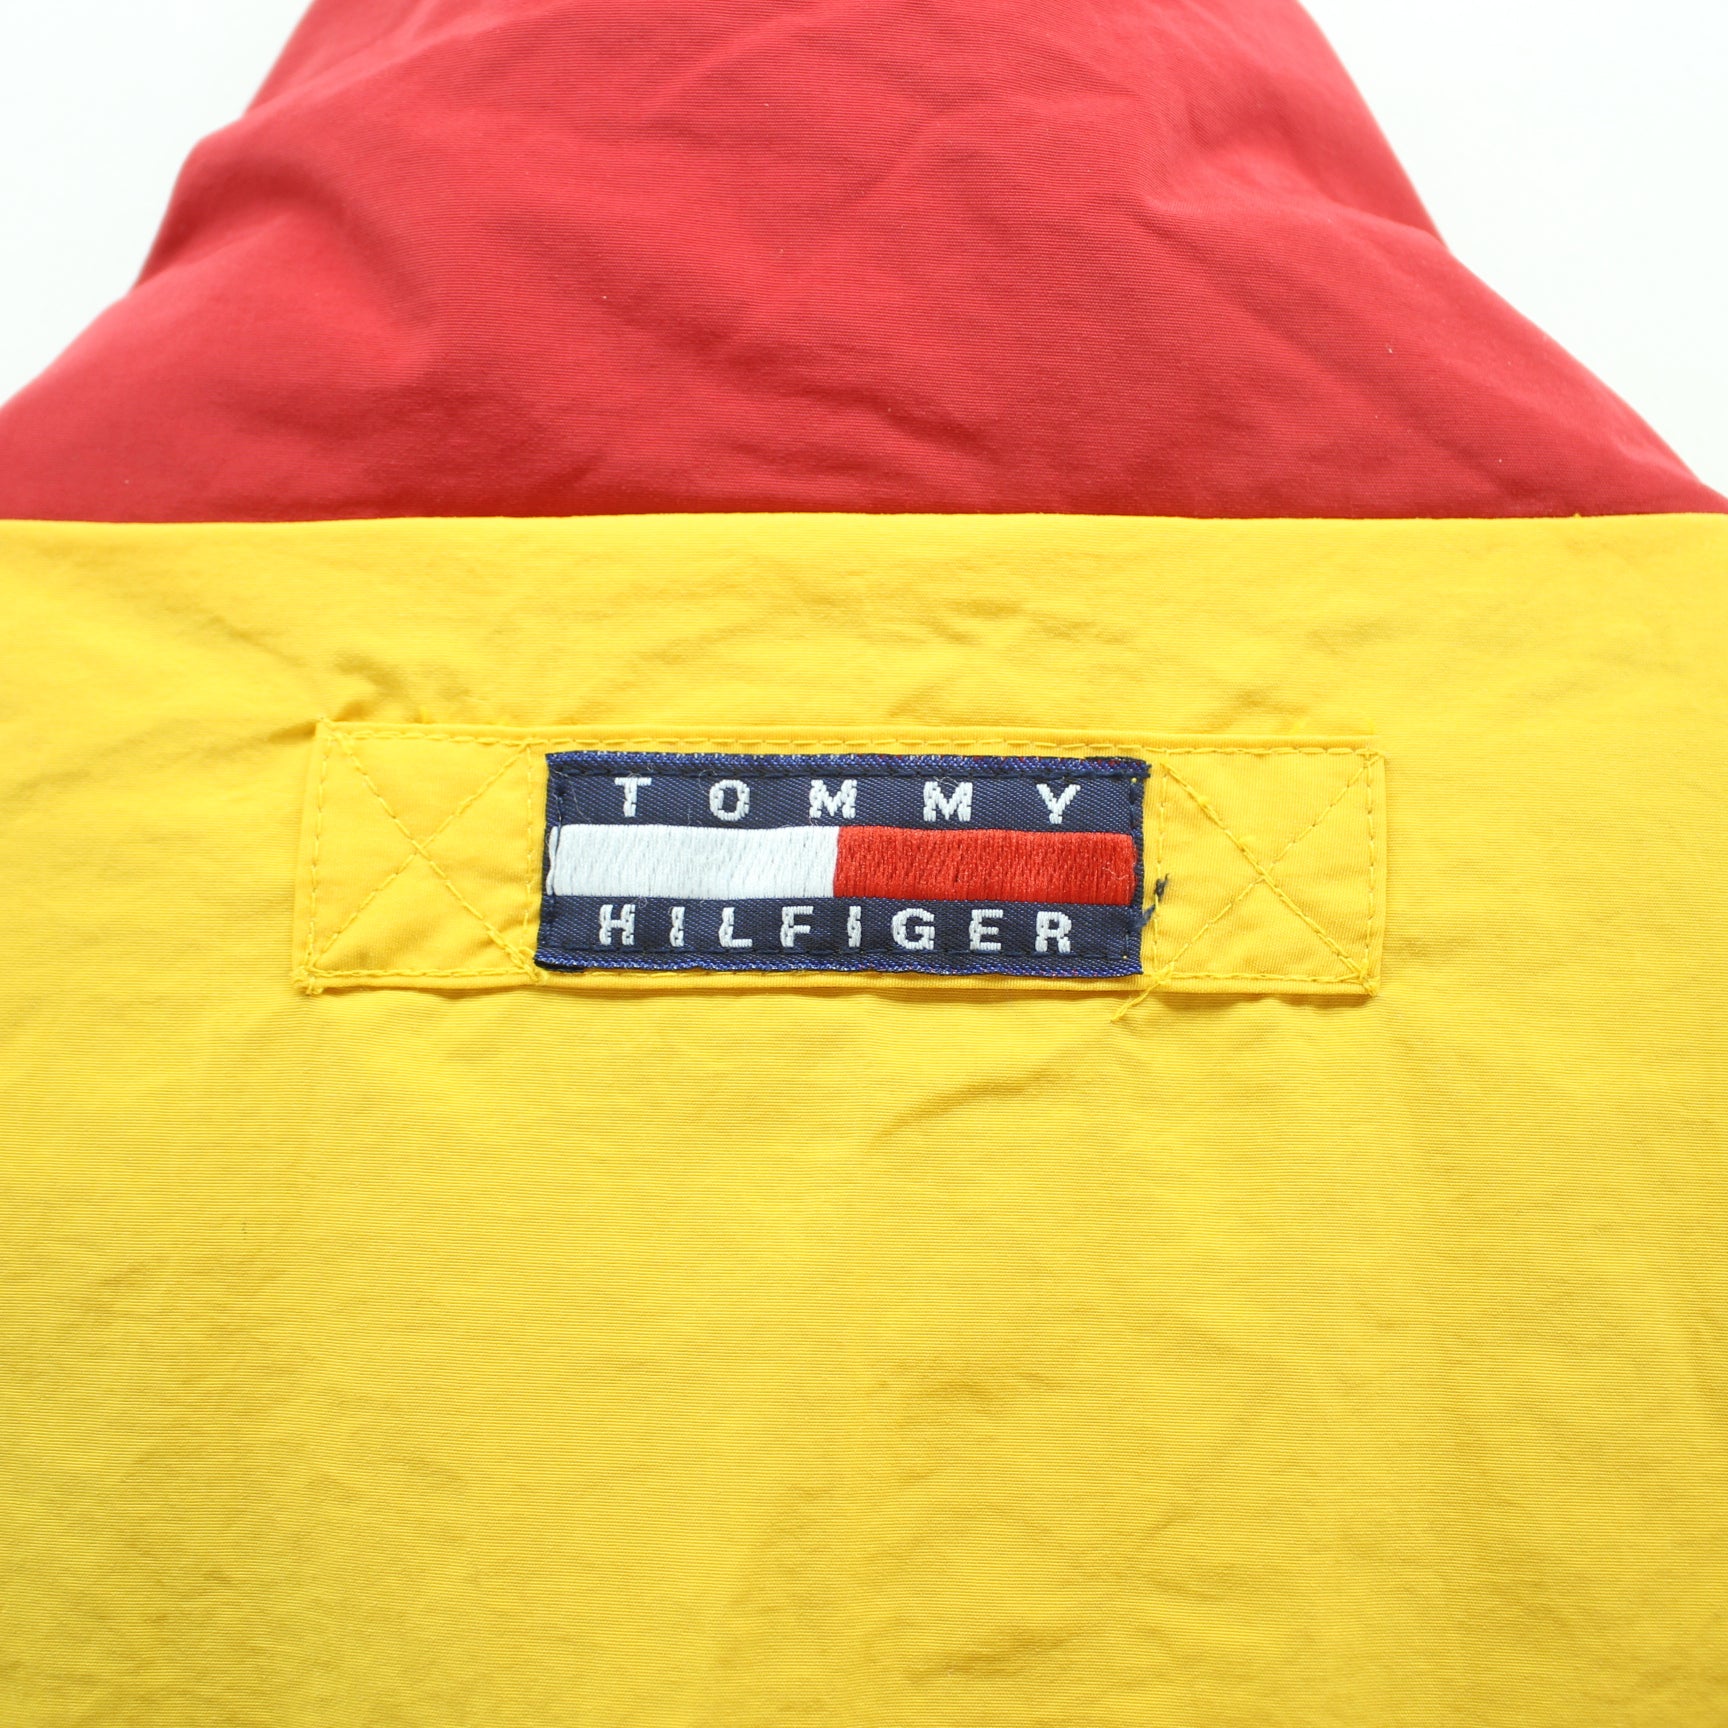 tommy hilfiger red yellow blue jacket